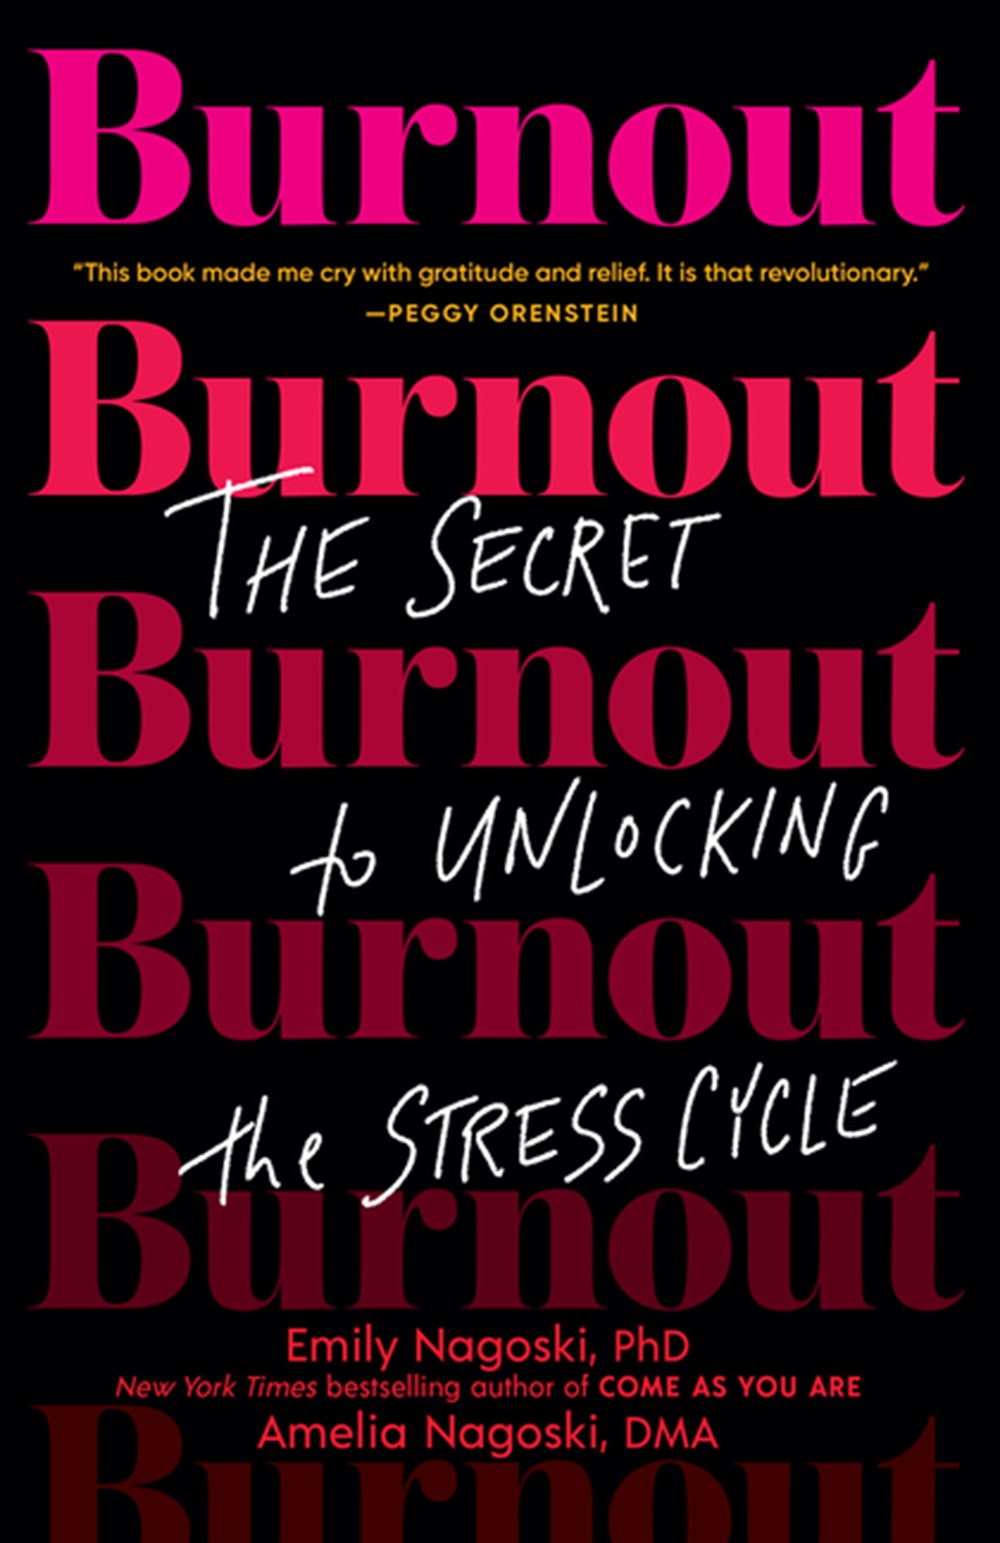 The cover of the book Burnout